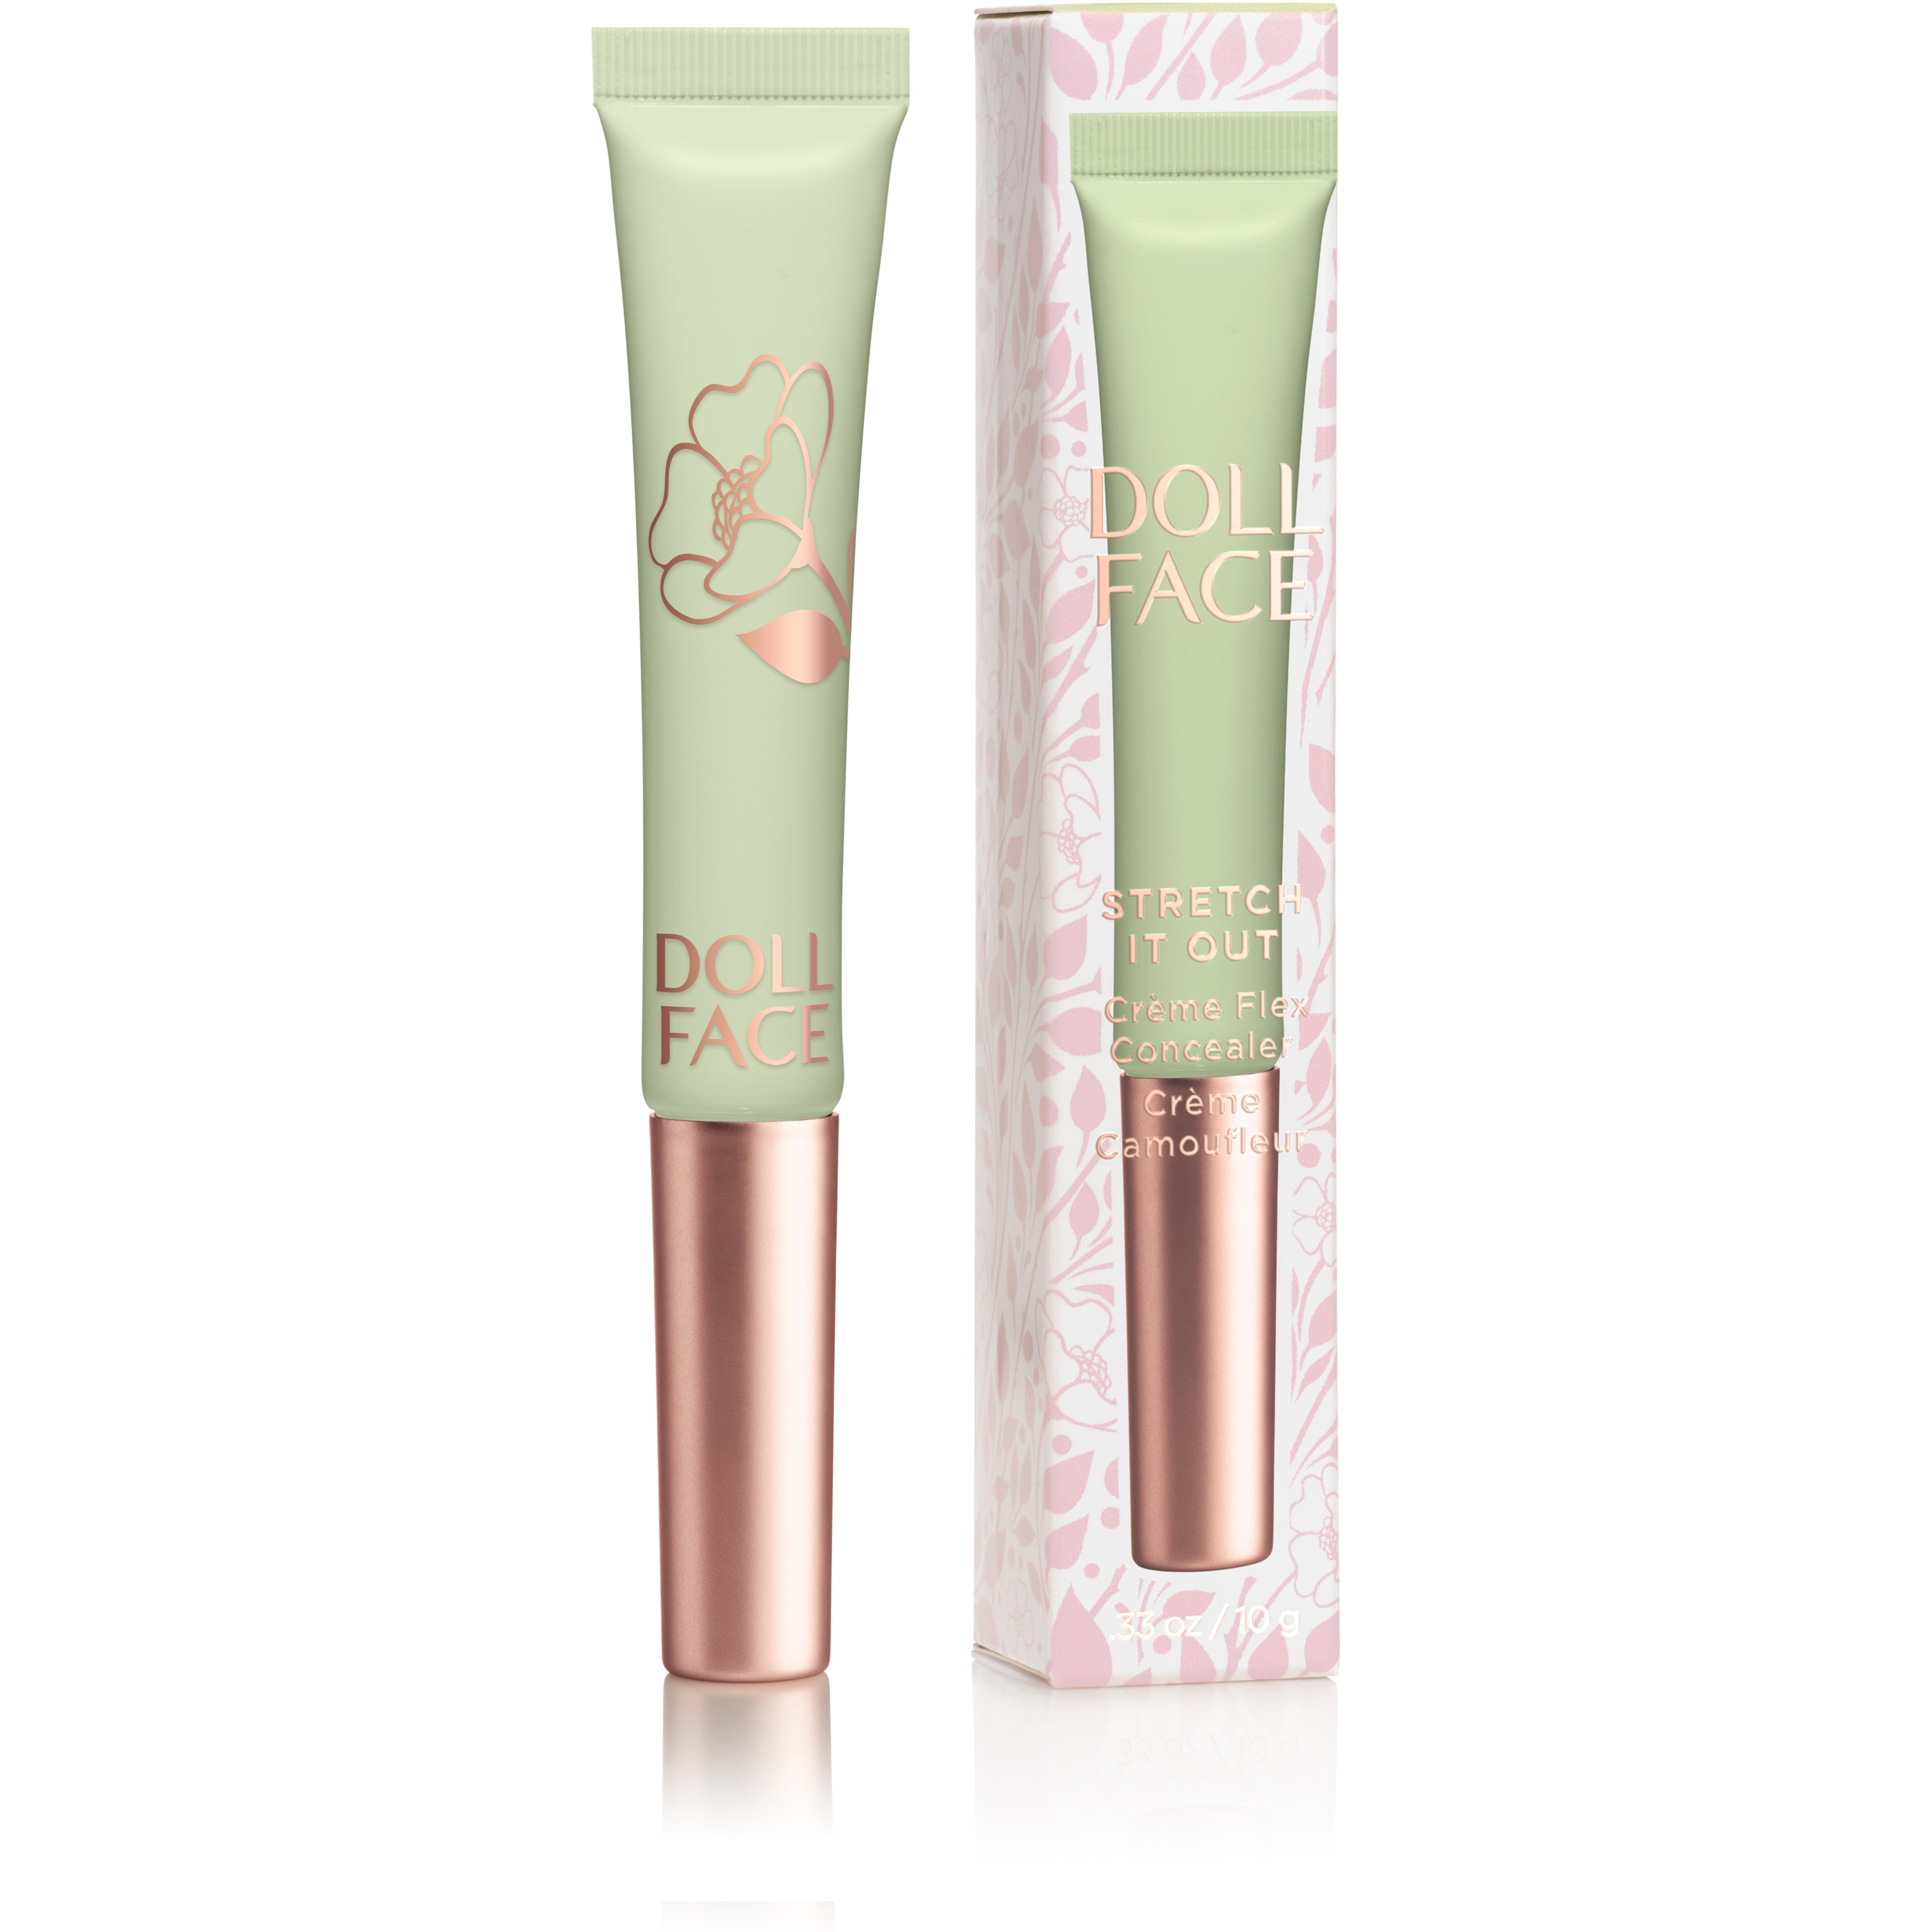 Doll Face Stretch It Out Fluid Concealer Camo Green